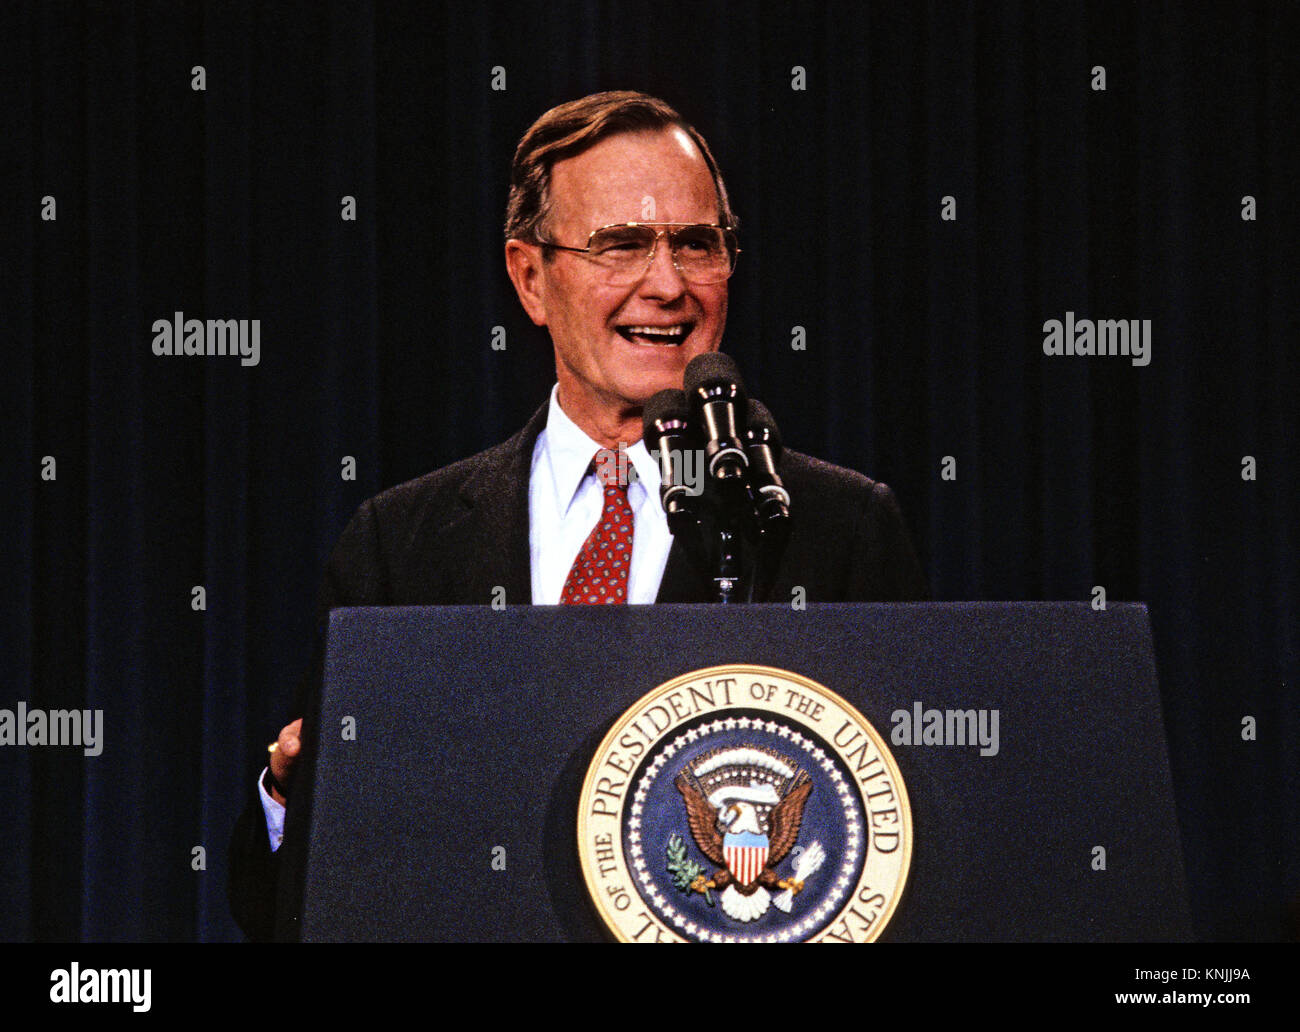 Washington, District of Columbia, USA. 6th Feb, 1989. United States President George H.W. Bush announces his savings and loan bailout plan at a press conference at the White House in Washington, DC on February 6, 1989. Credit: Ron Sachs/CNP Credit: Ron Sachs/CNP/ZUMA Wire/Alamy Live News Stock Photo